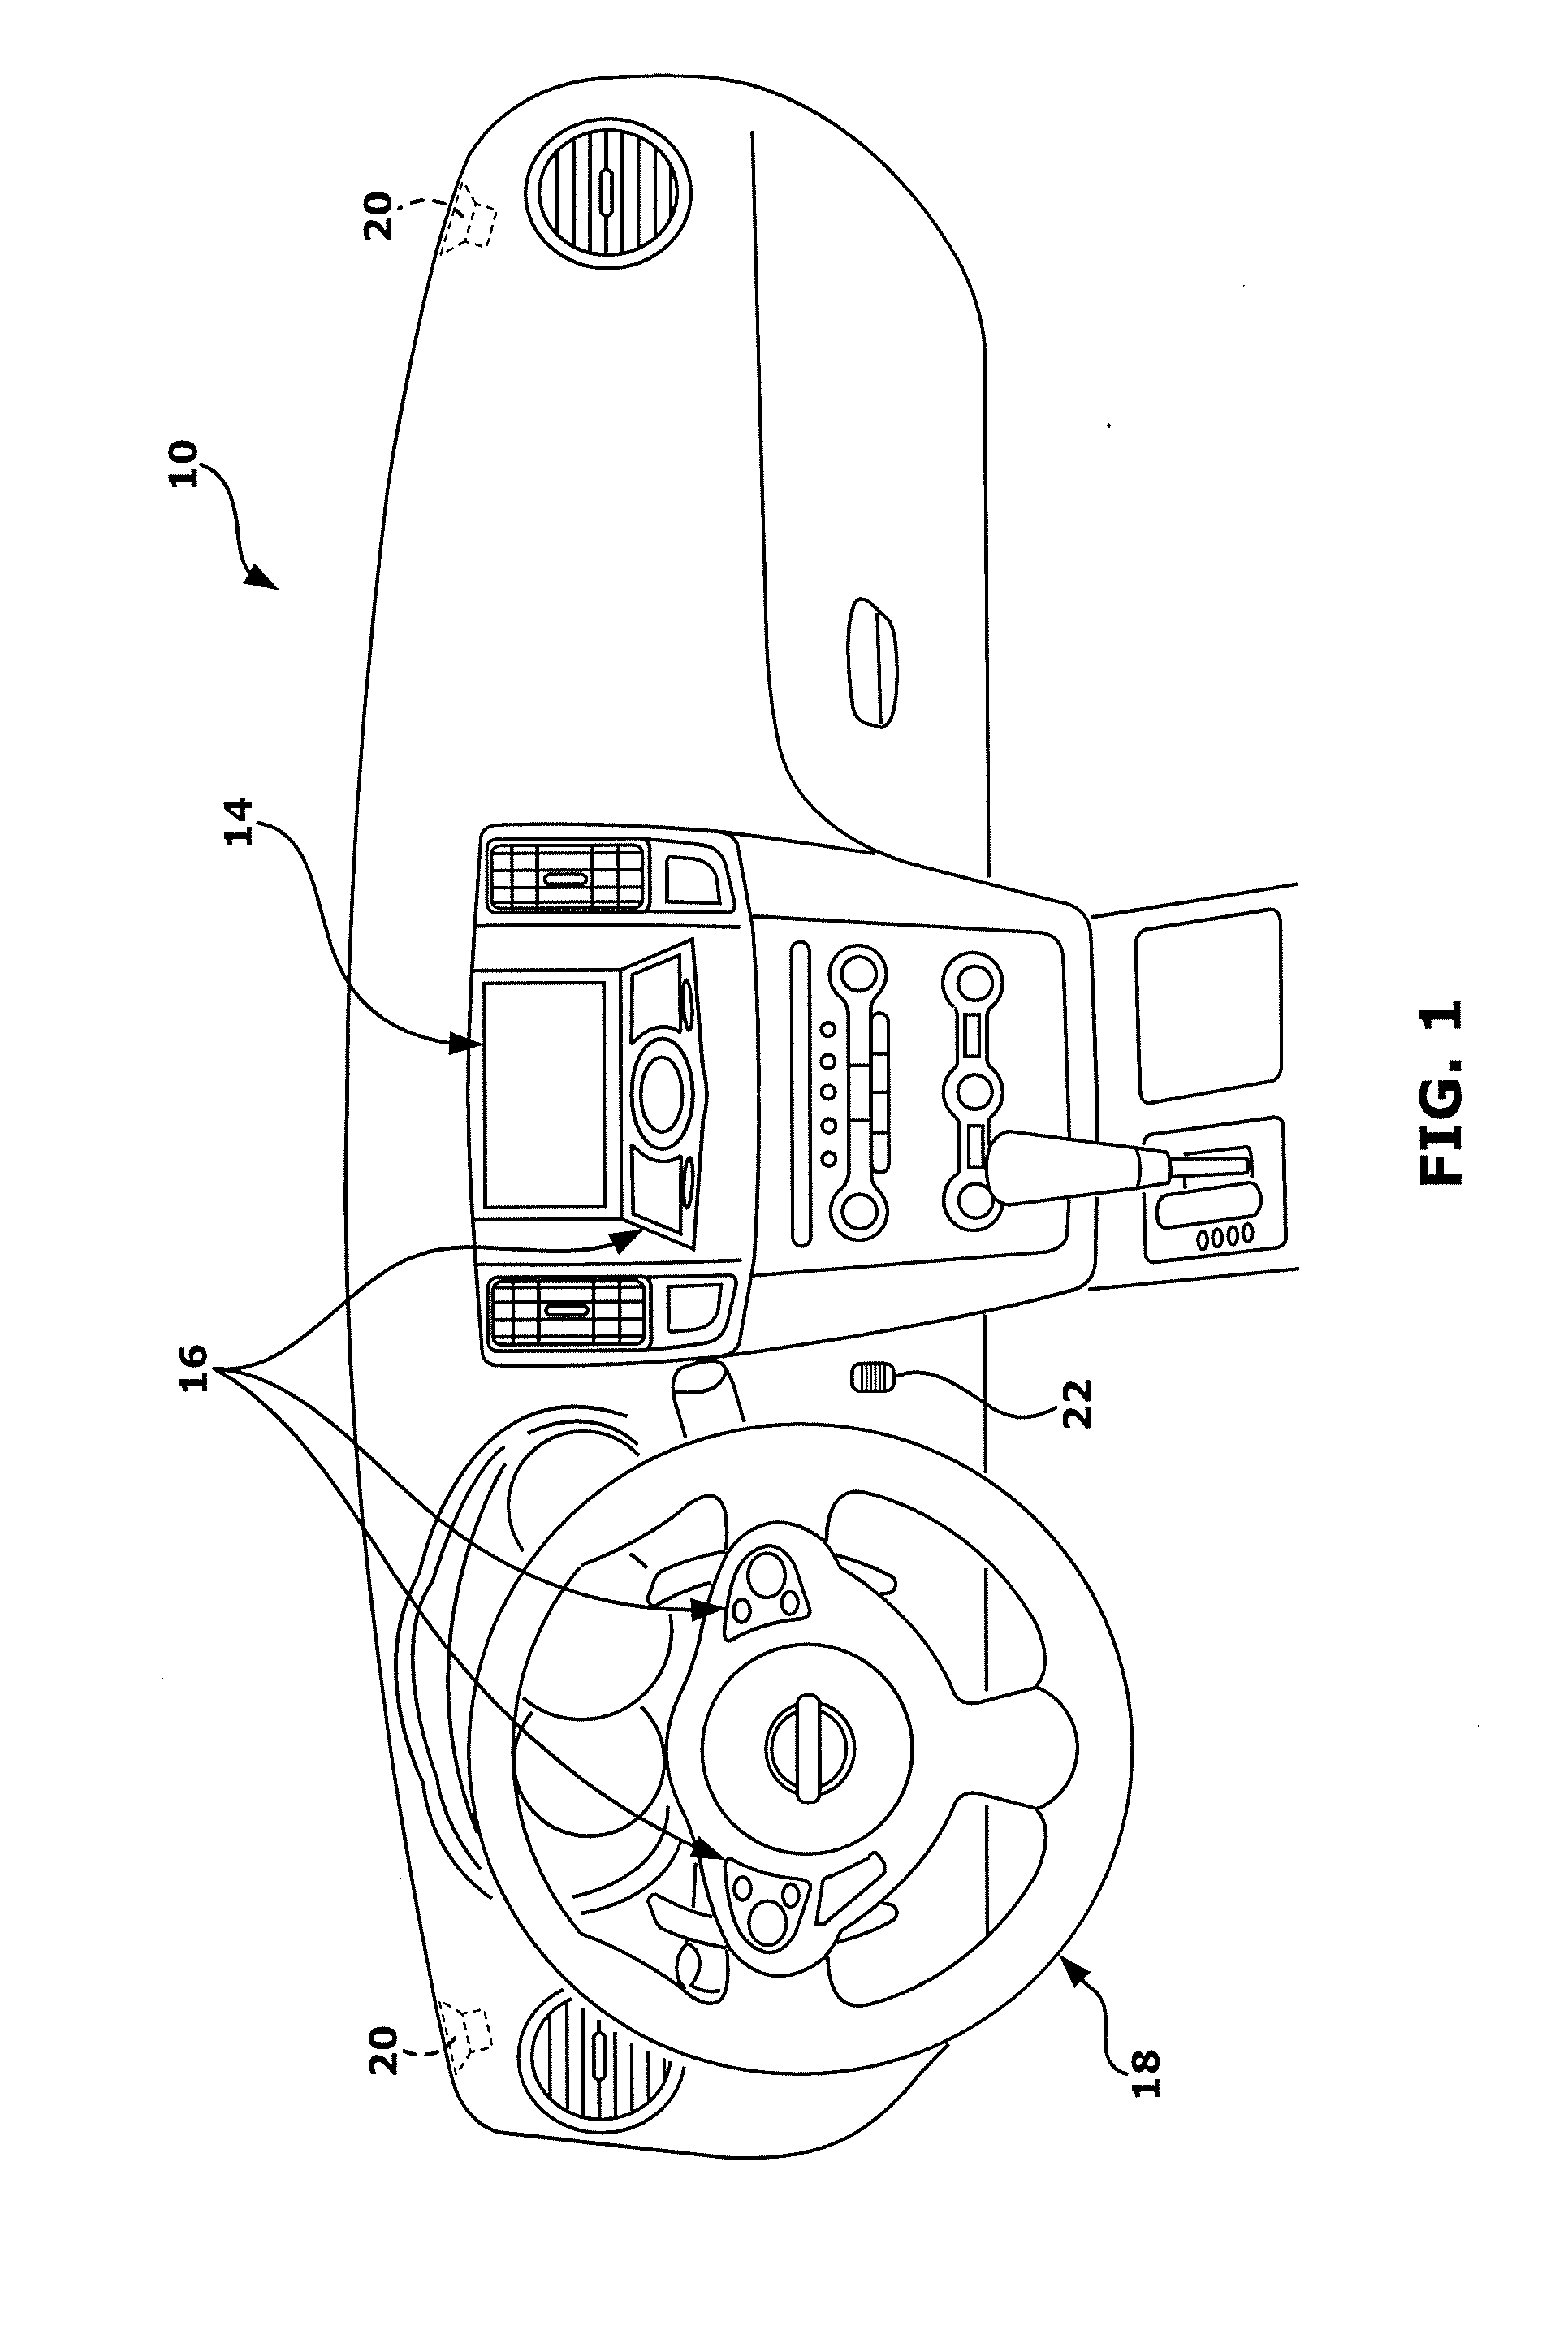 Vehicle user interface system and method having location specific feature availability